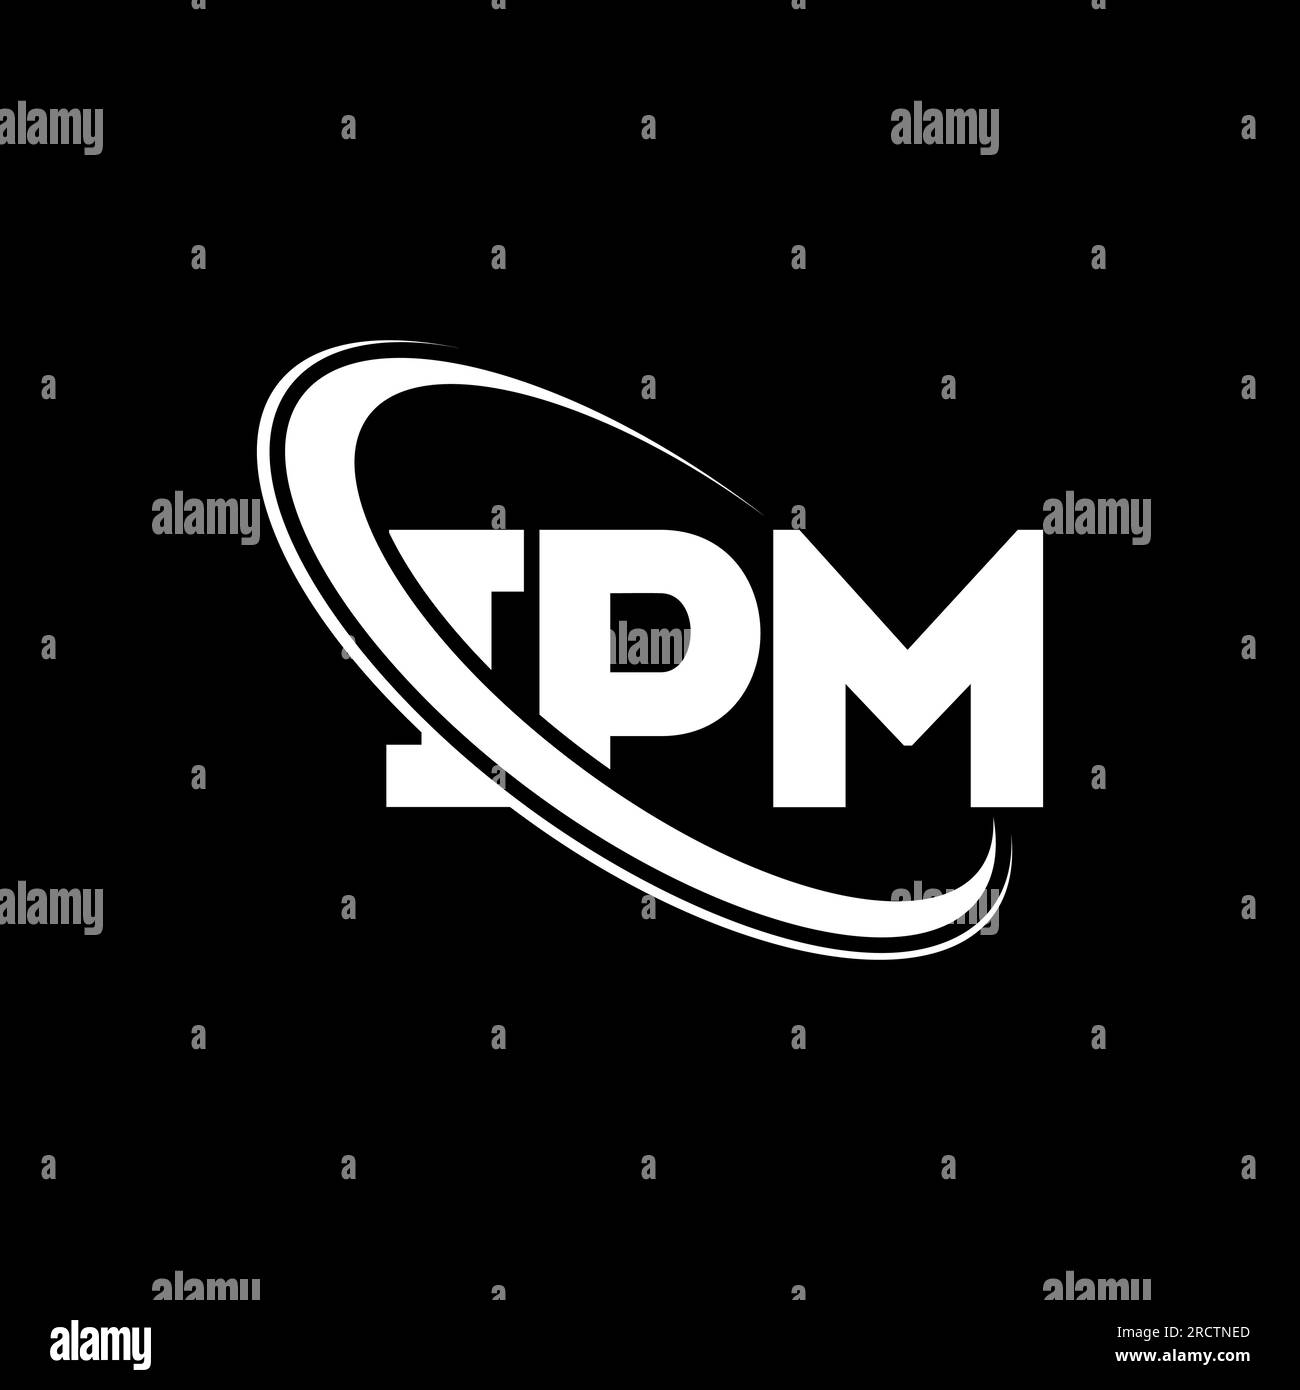 IPM logo. IPM letter. IPM letter logo design. Initials IPM logo linked with circle and uppercase monogram logo. IPM typography for technology, busines Stock Vector